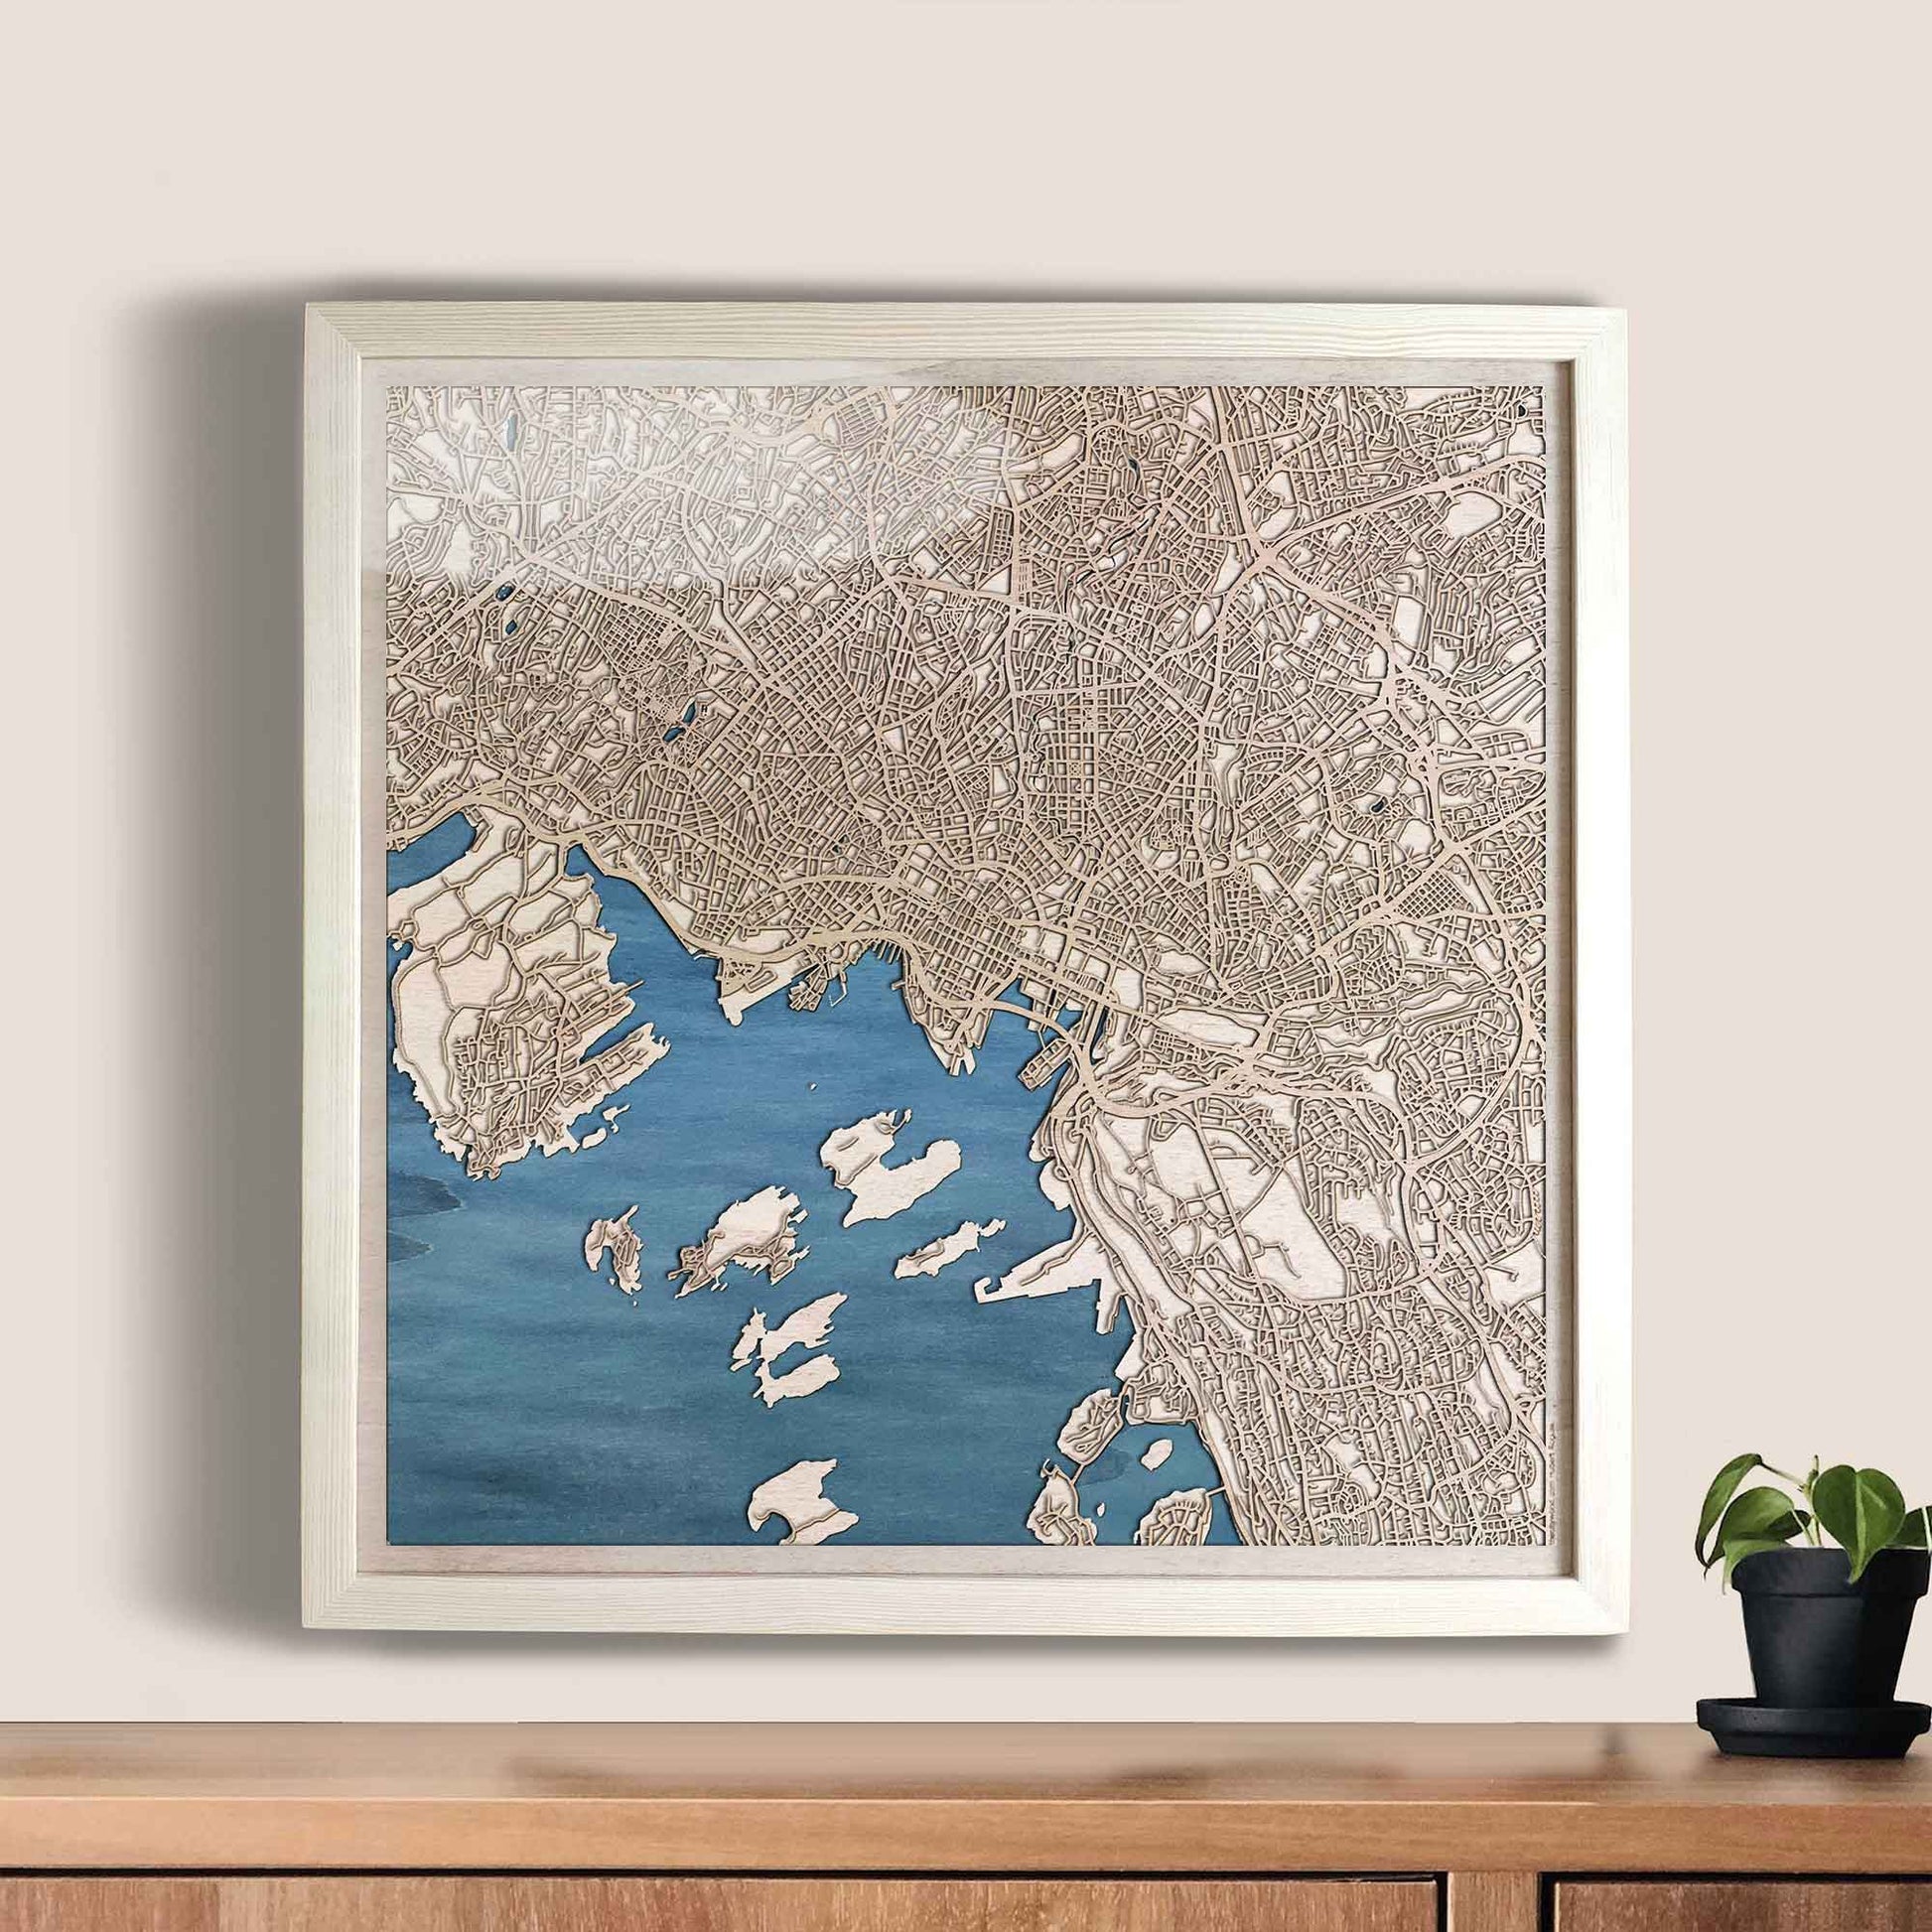 Oslo Wooden Map by CityWood - Custom Wood Map Art - Unique Laser Cut Engraved - Anniversary Gift